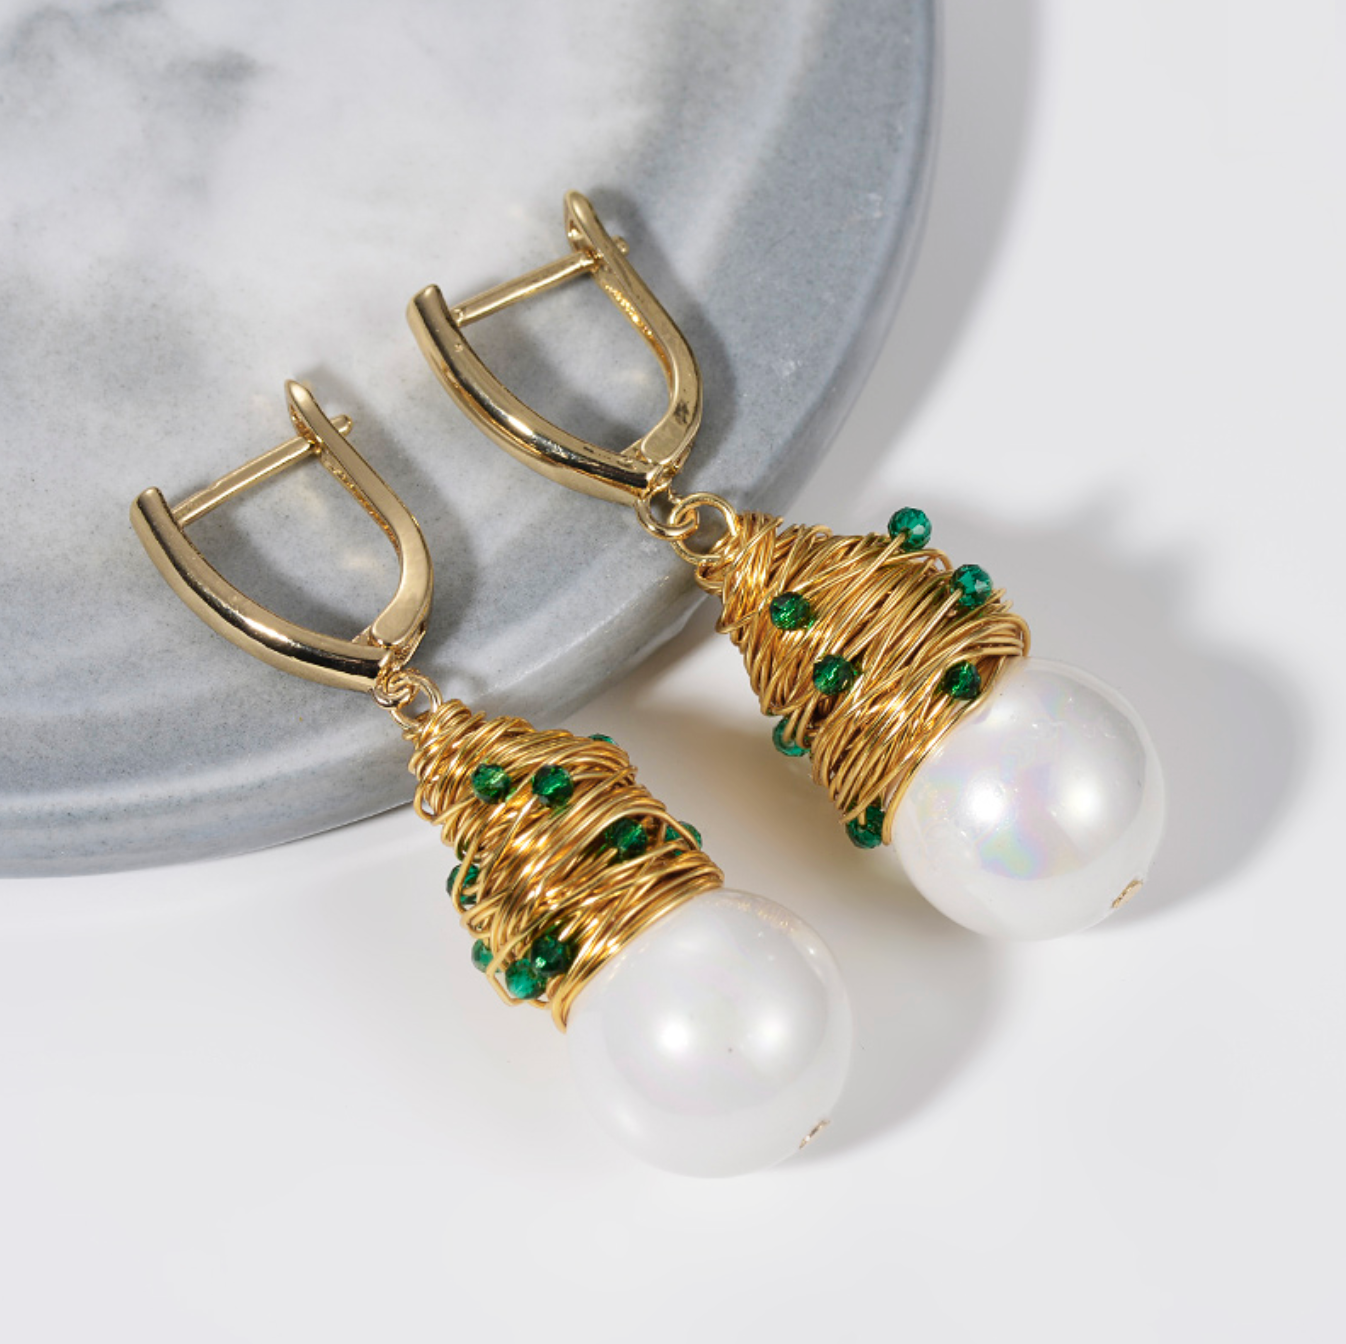 Wired Golden Drop Earrings with Emerald Stones